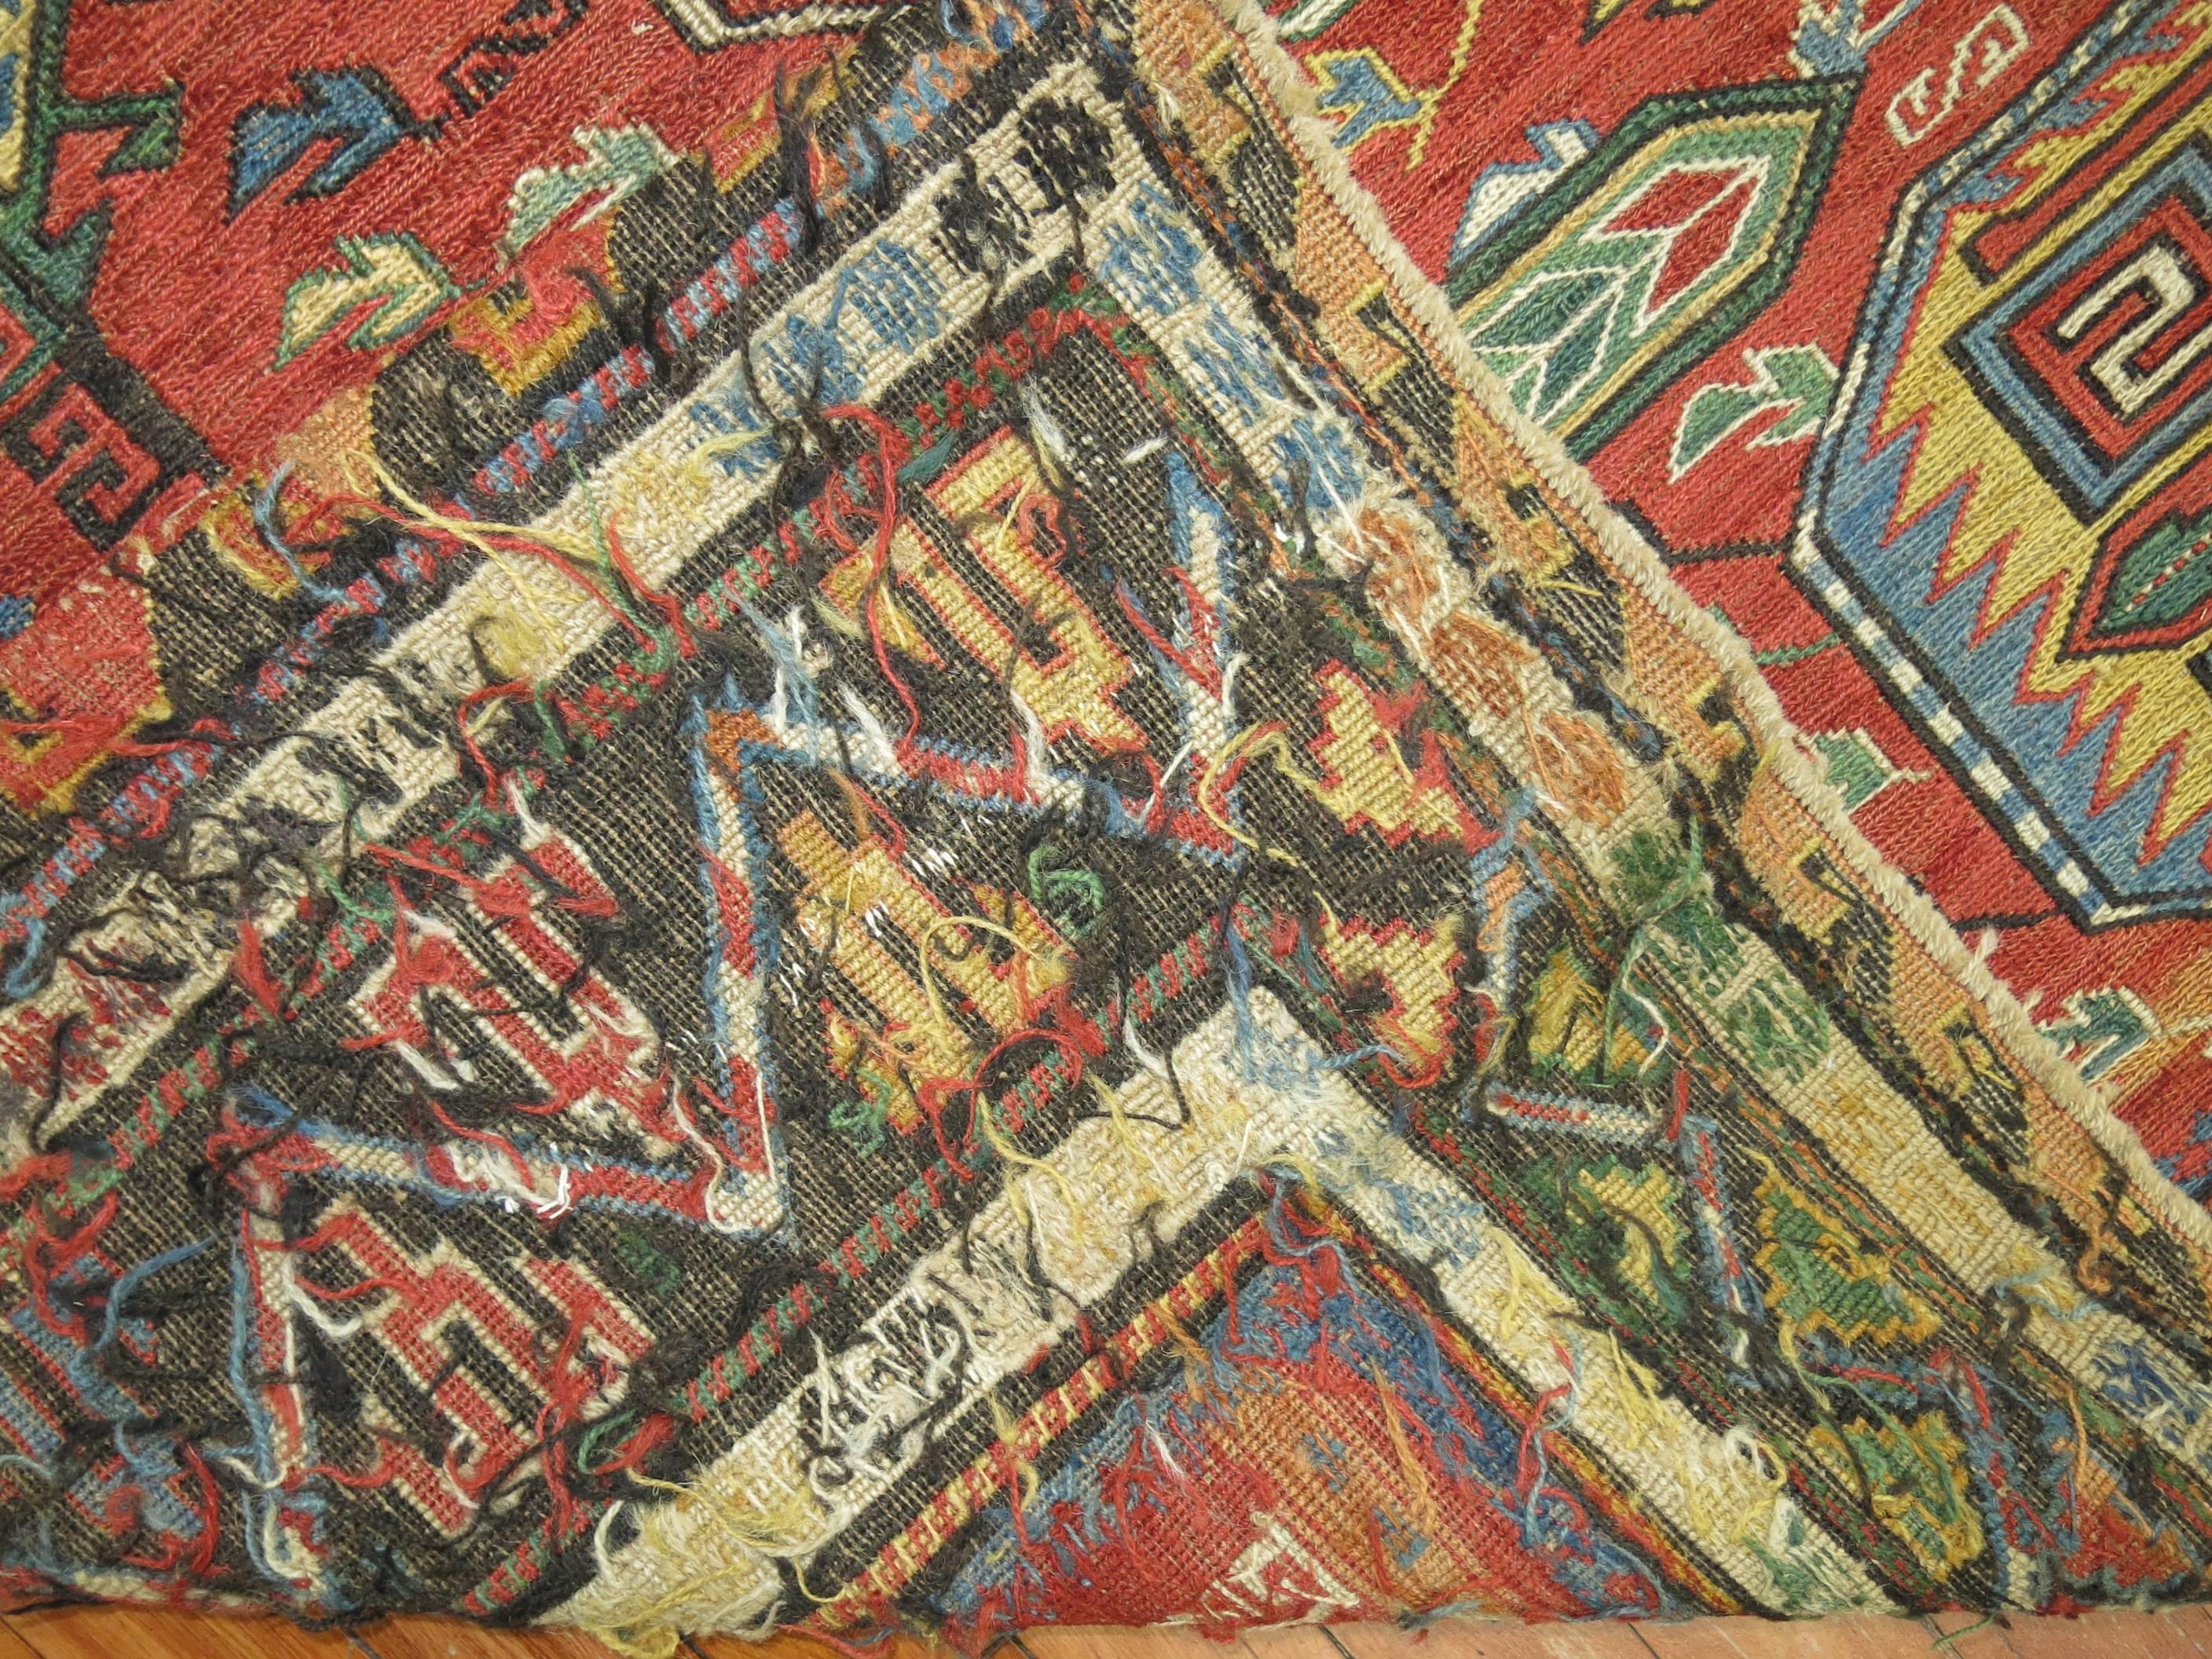 Roomsize Antique Soumak Caucasian Rug In Excellent Condition For Sale In New York, NY